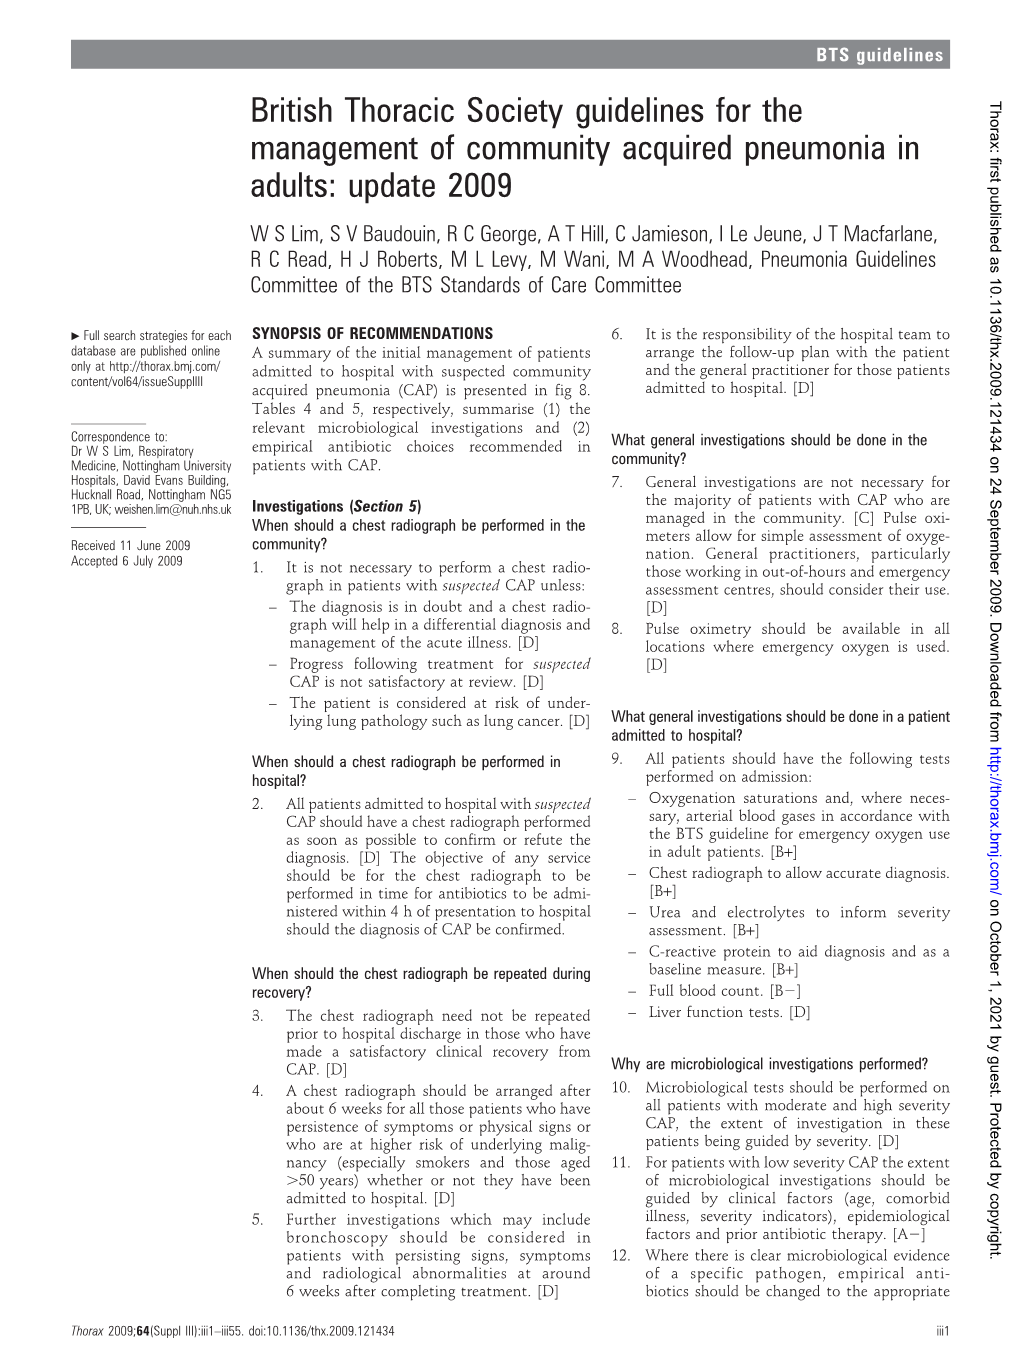 BTS Guidelines for the Management of Community Acquired Pneumonia in Adults: Update 2009